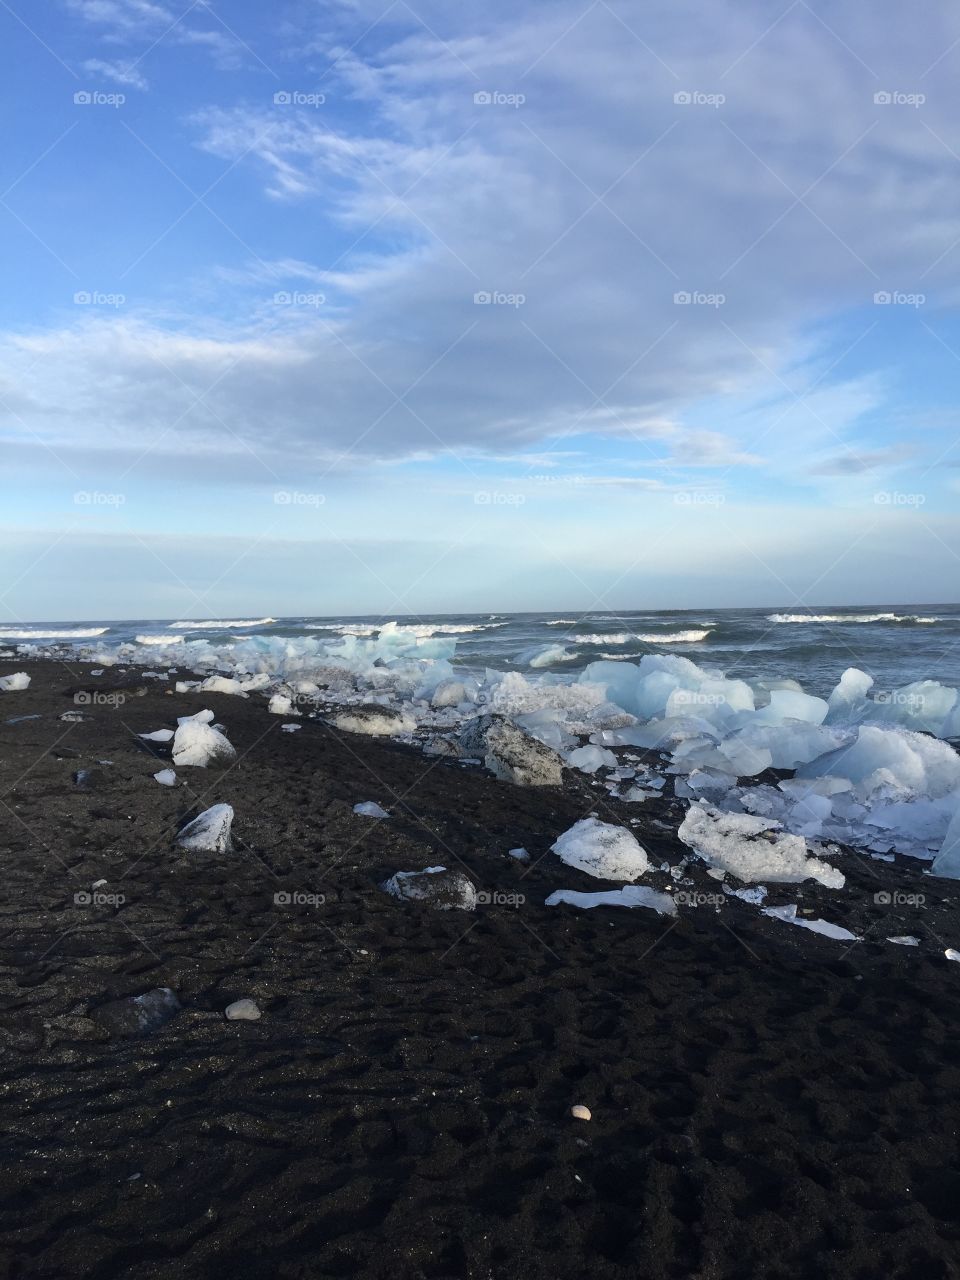 This is a black sand beach in Iceland that has large chunks of glacial ice on the shore. 